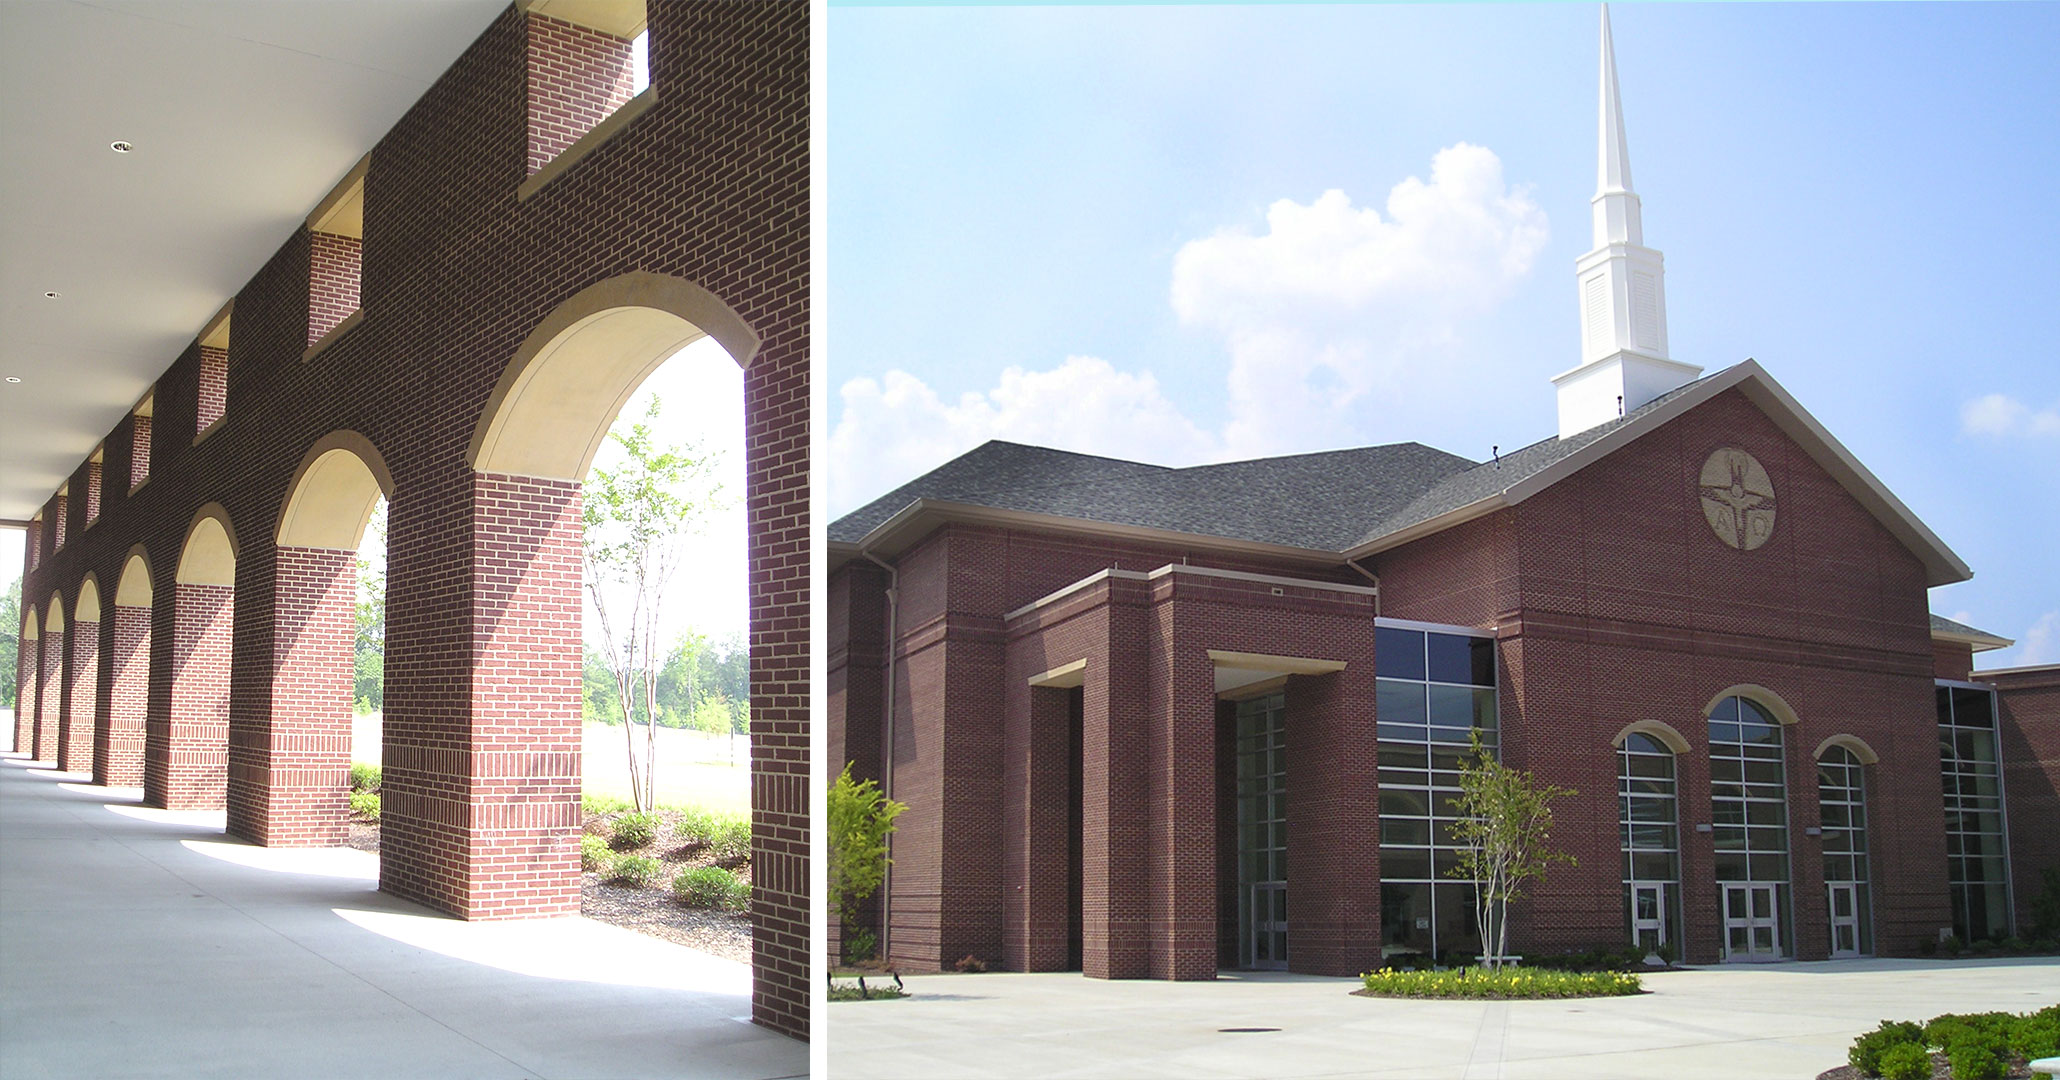 Boudreaux architects worked with the Riverland Hills Church to provide master planning services for their campus.